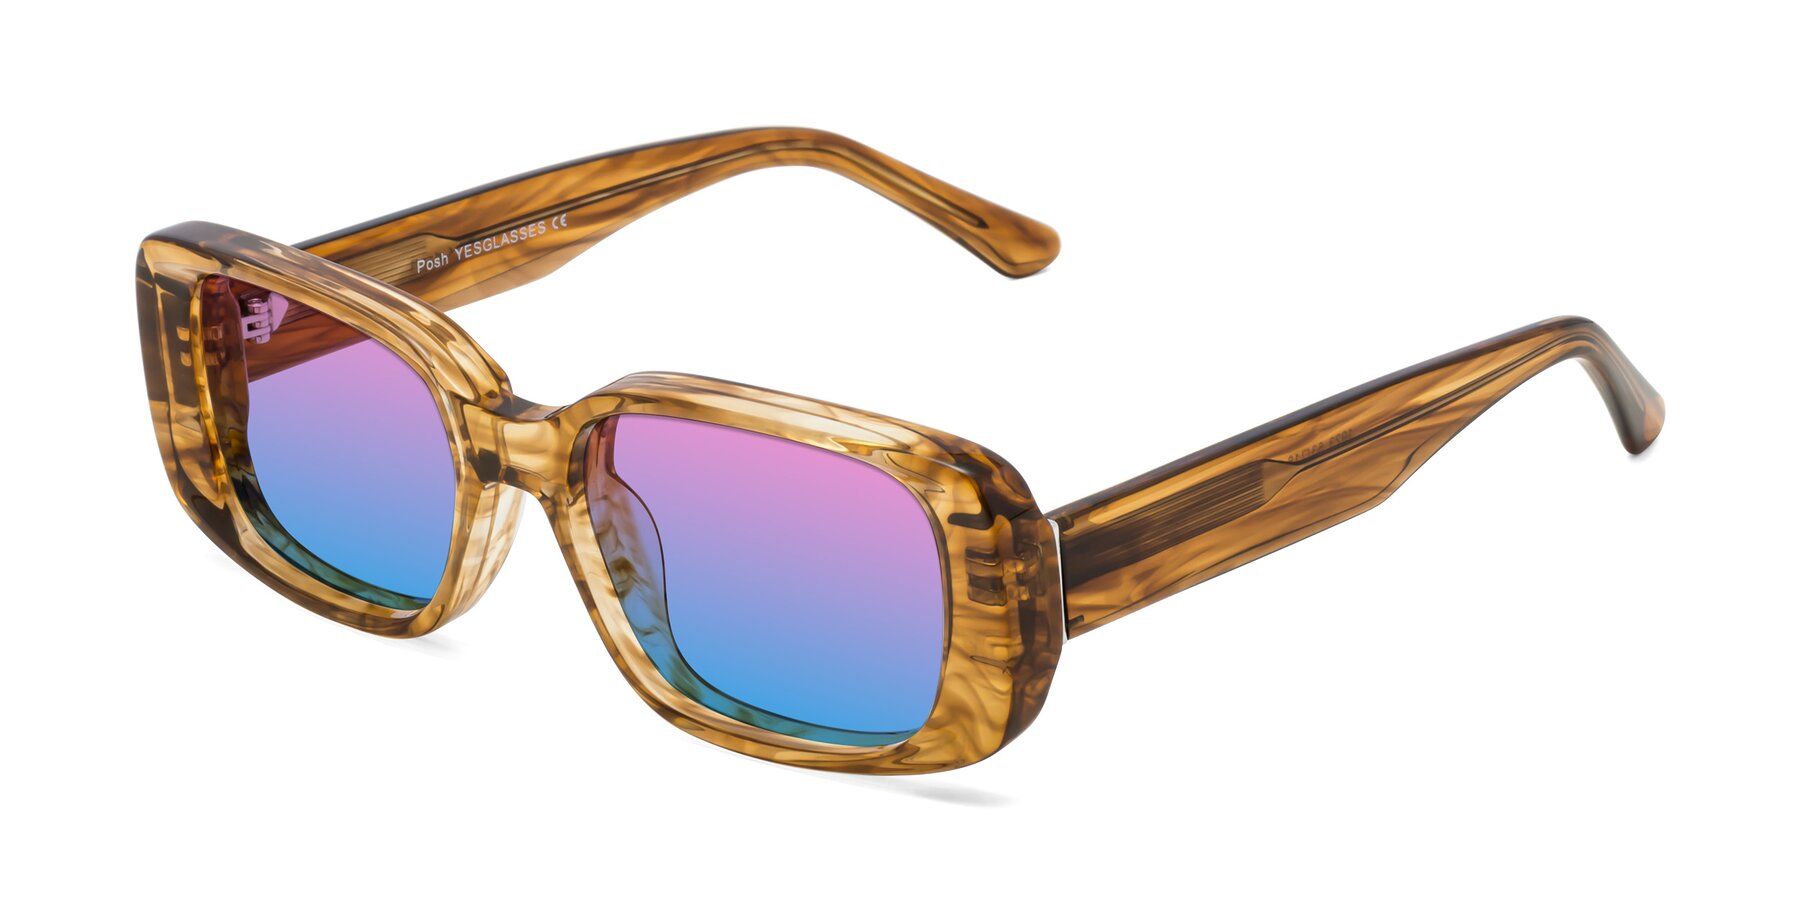 Angle of Posh in Stripe Amber with Pink / Blue Gradient Lenses